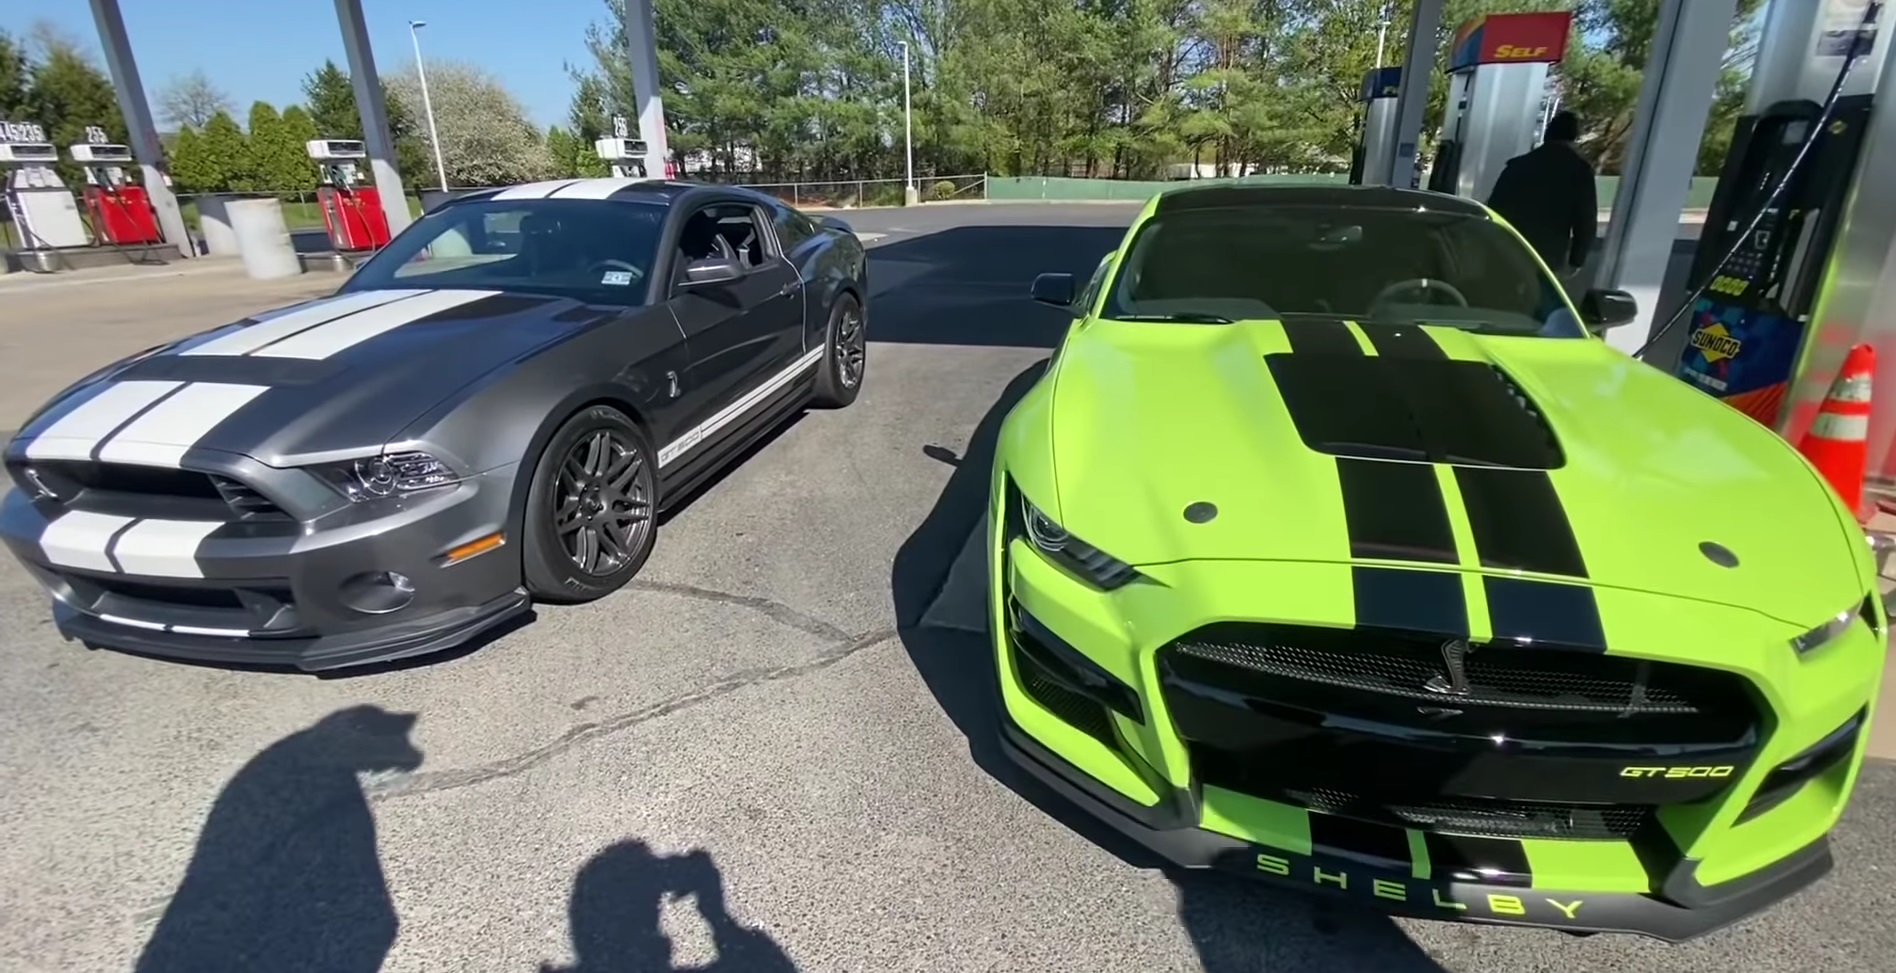 Video: 2013 Ford Mustang Shelby GT500 vs 2020 Shelby GT 500 Epic Showdown